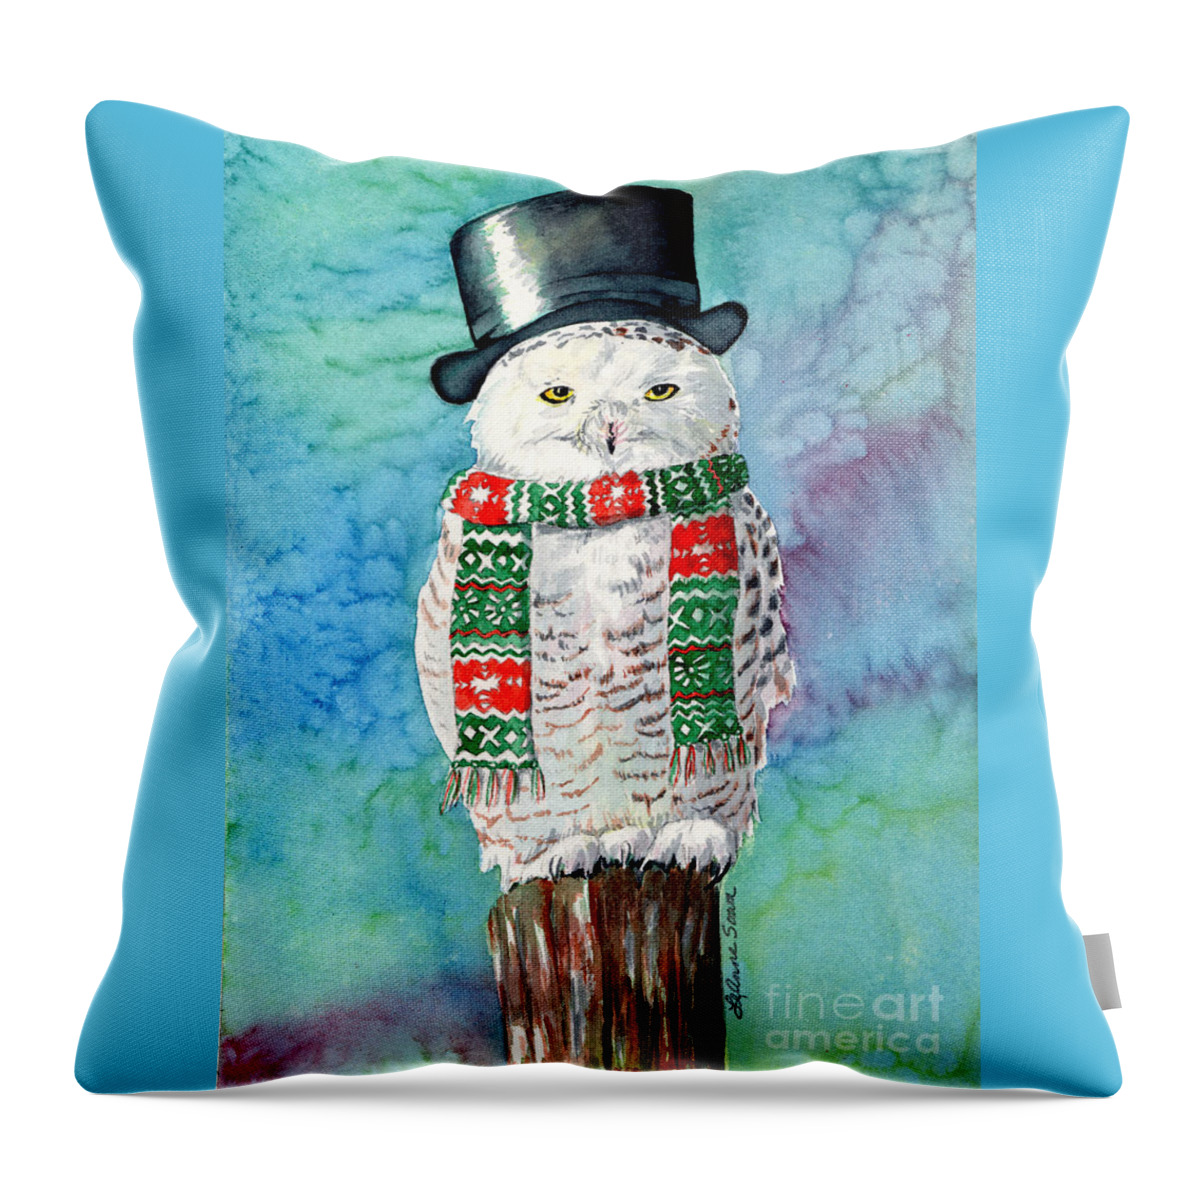 Owls Throw Pillow featuring the painting Snowman Owl by LeAnne Sowa